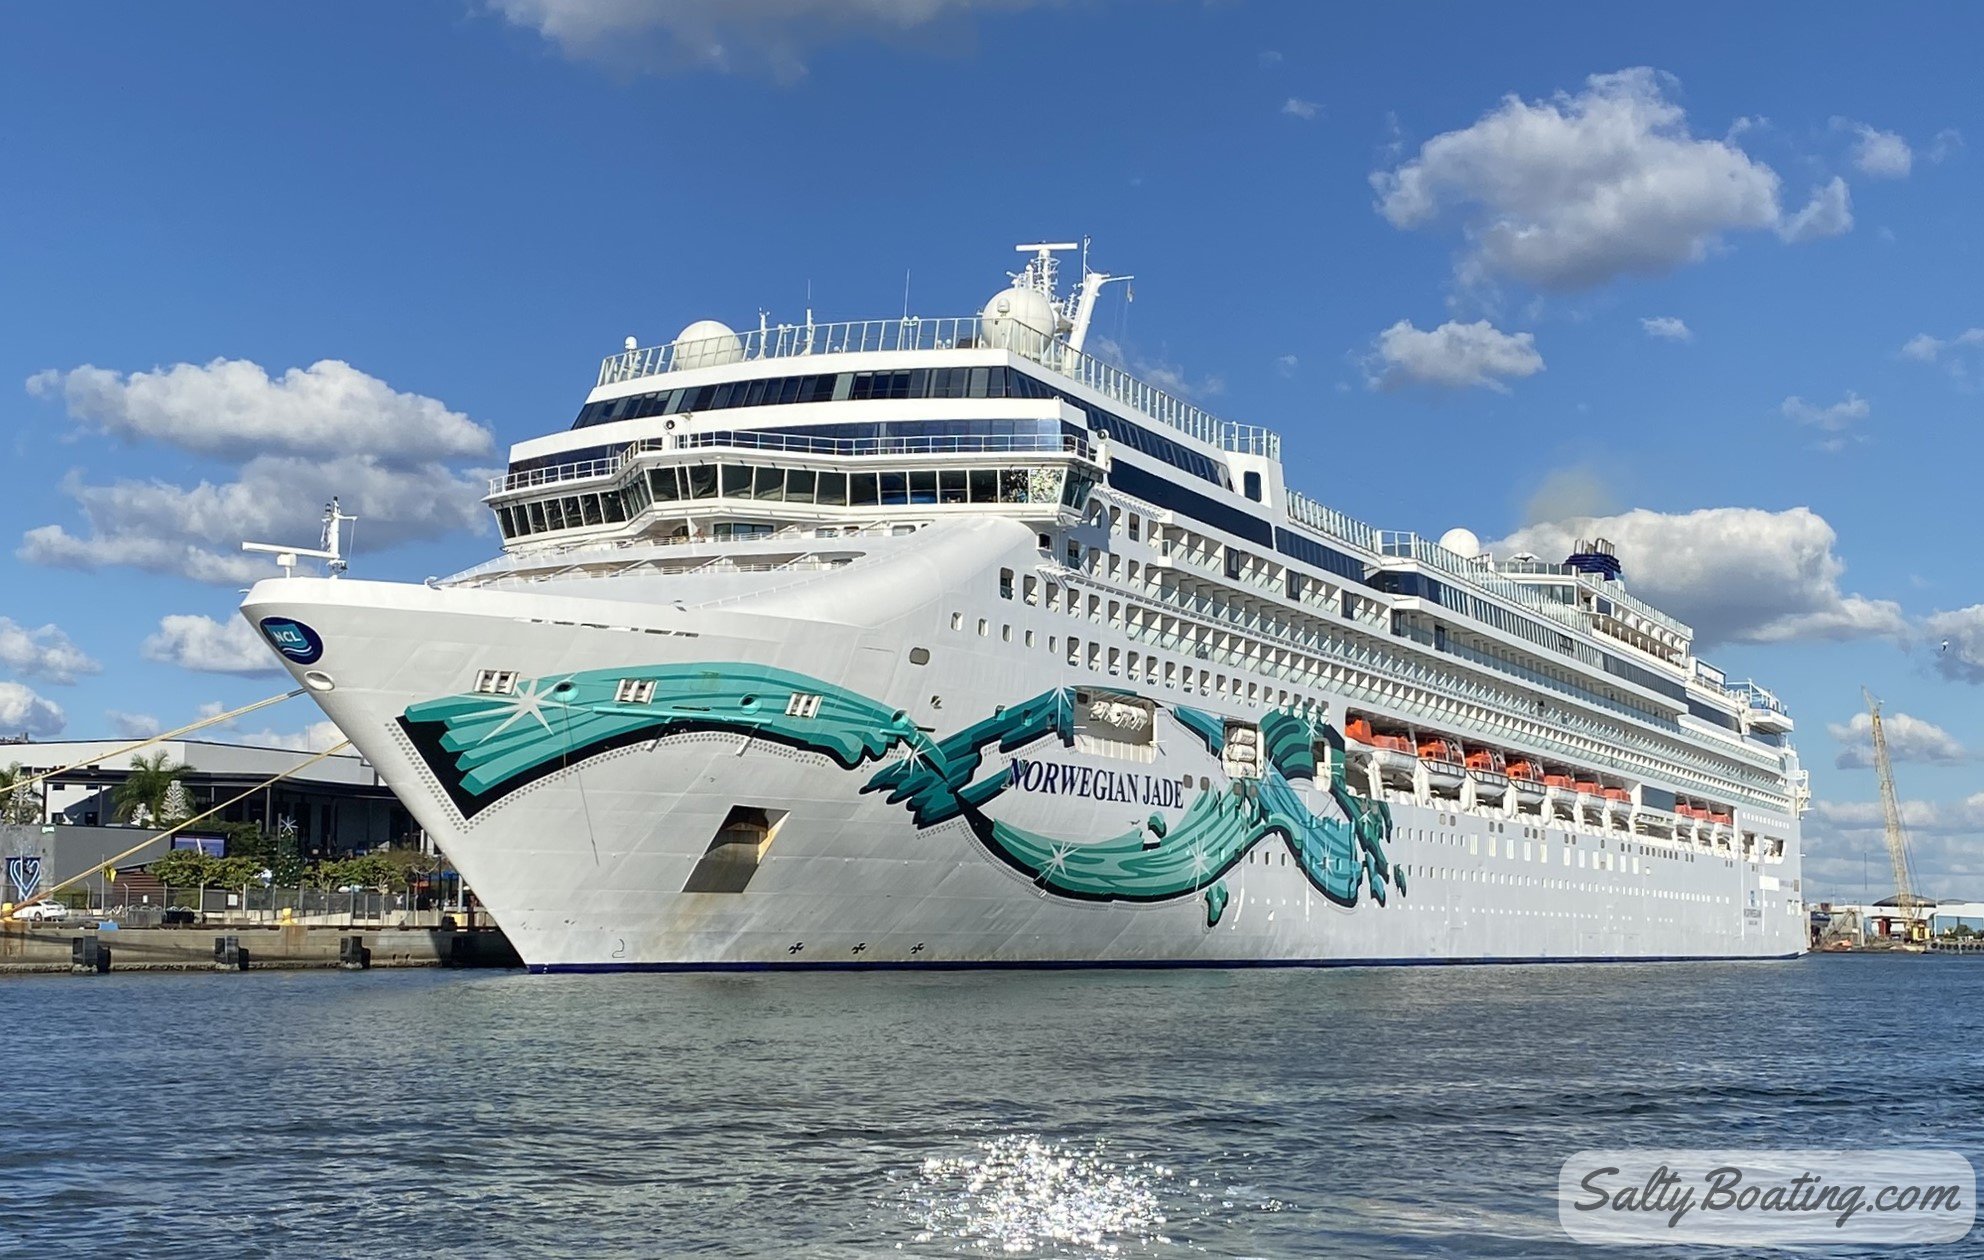 Norwegian Jade looks like a cool ship. Seems to be sailing from the Port of Tampa Florida currently.